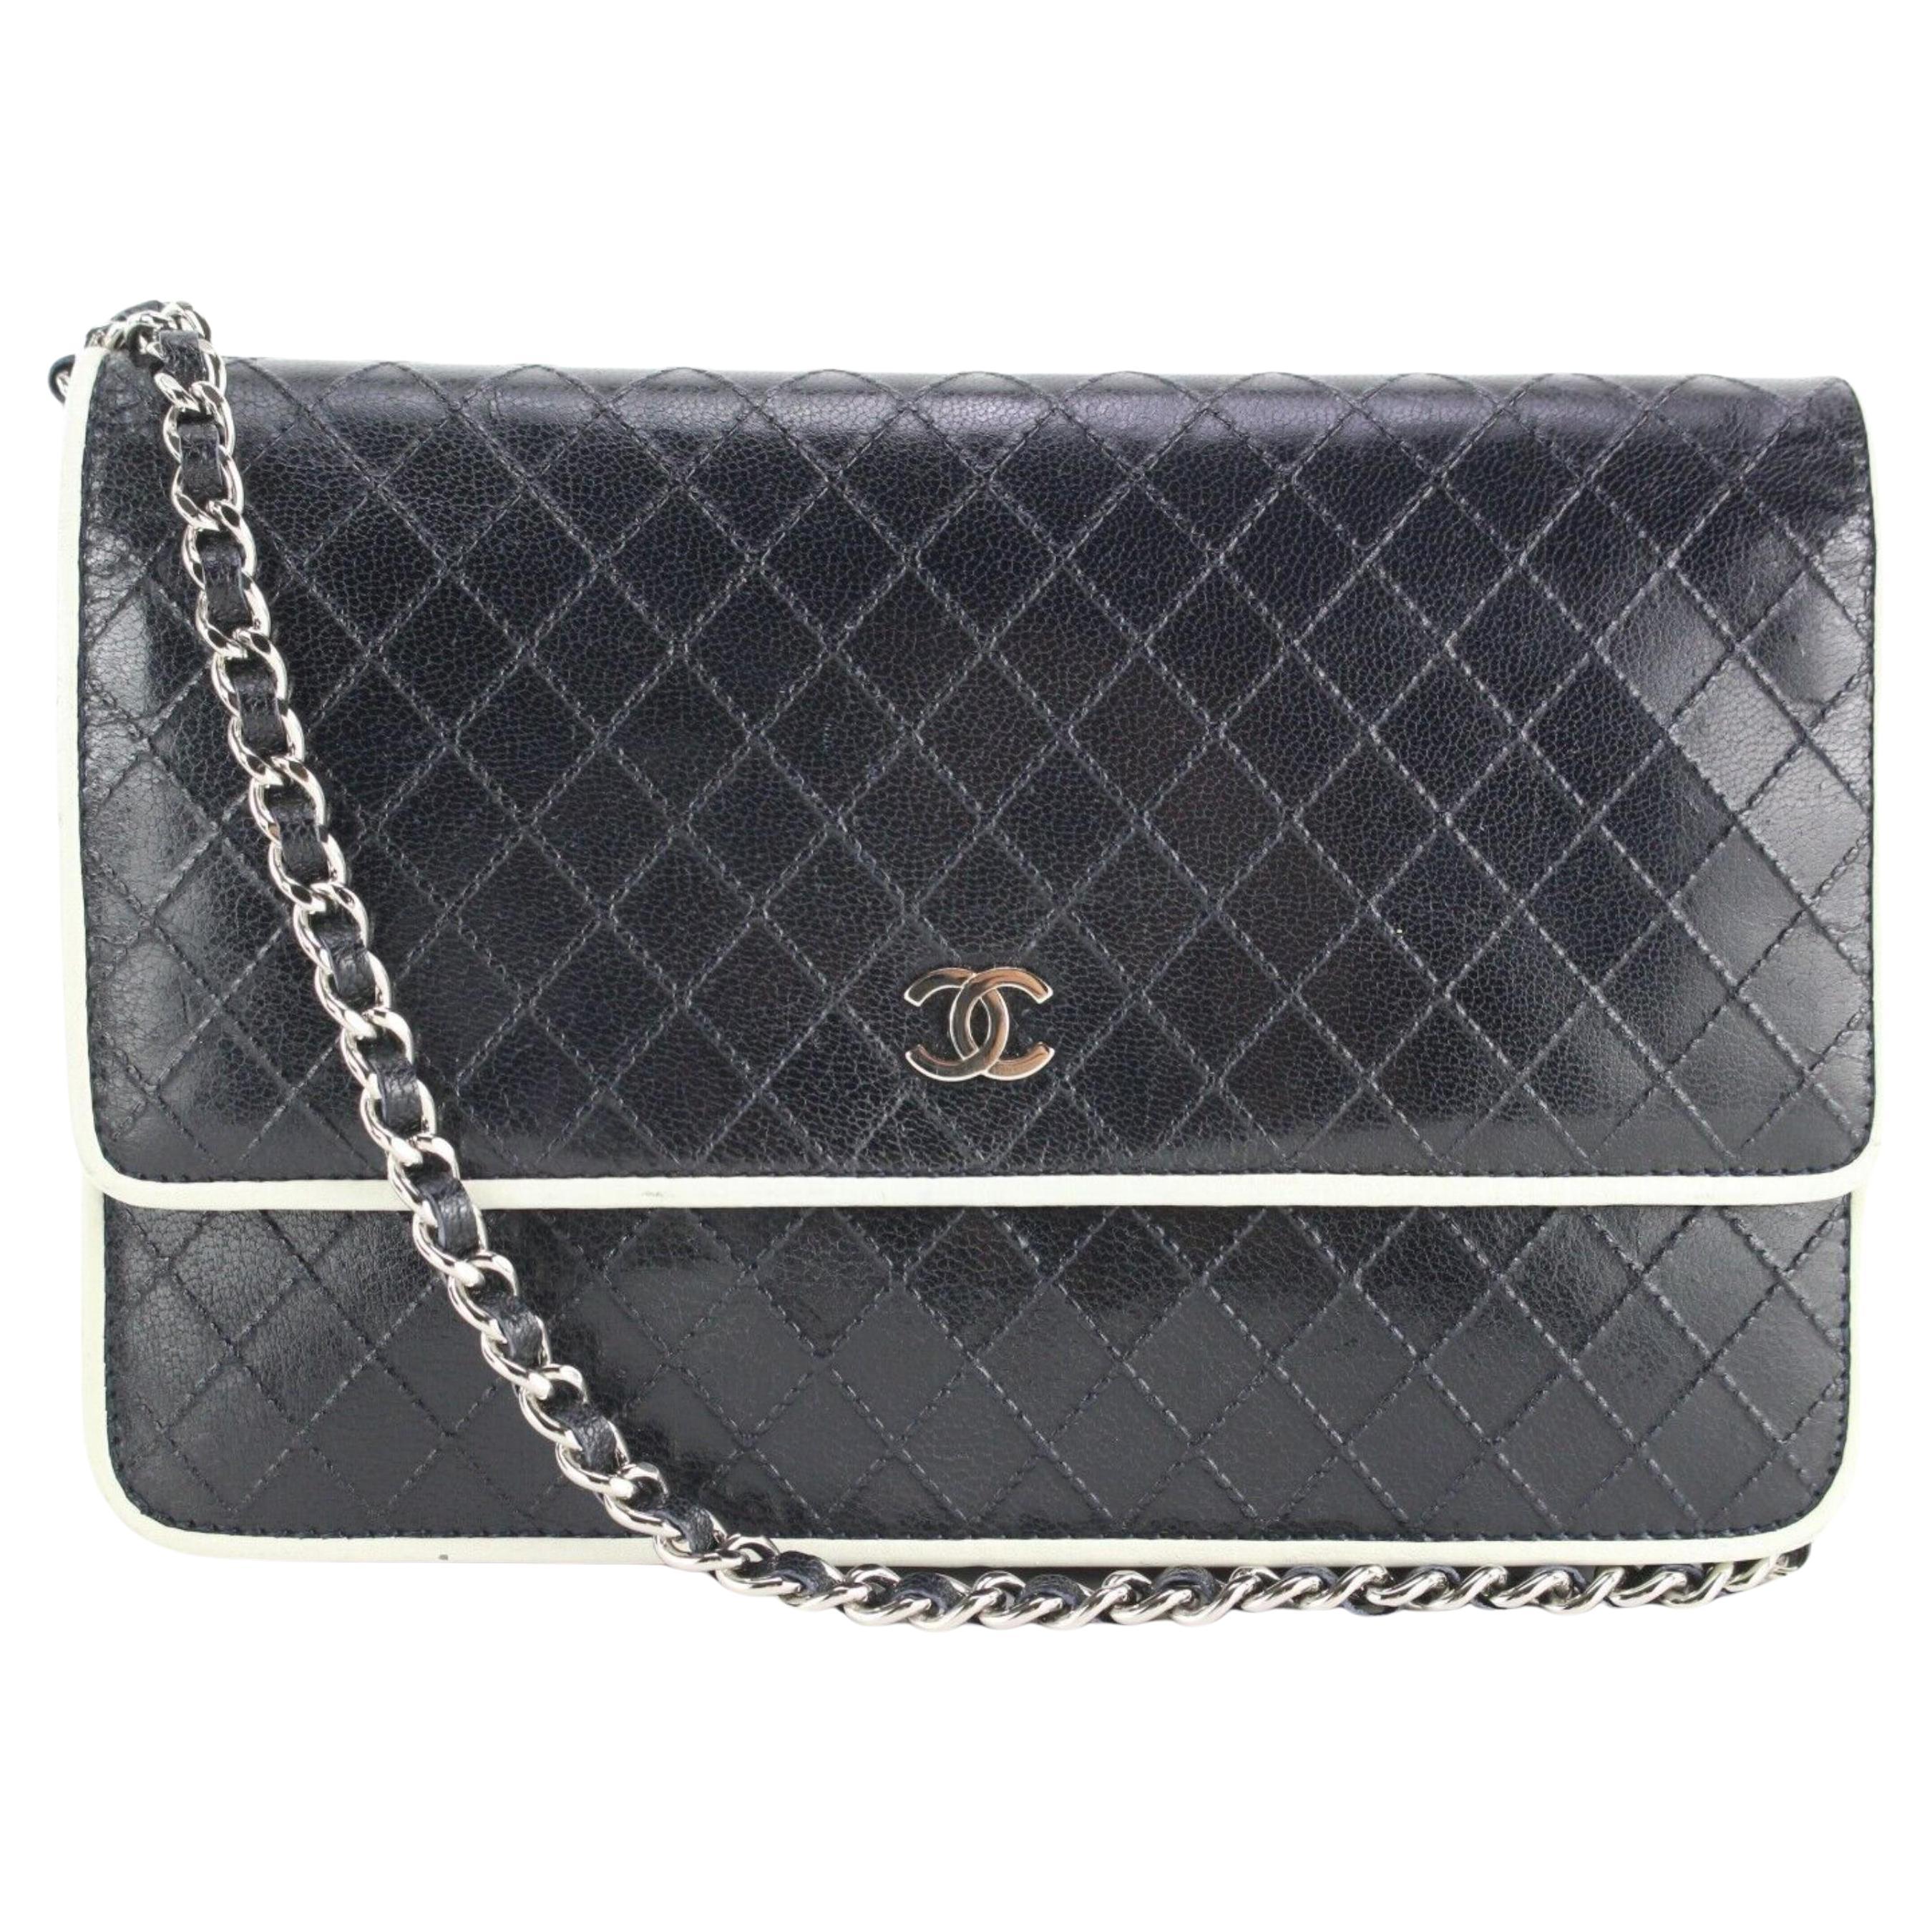 Chanel White Woc - 2 For Sale on 1stDibs